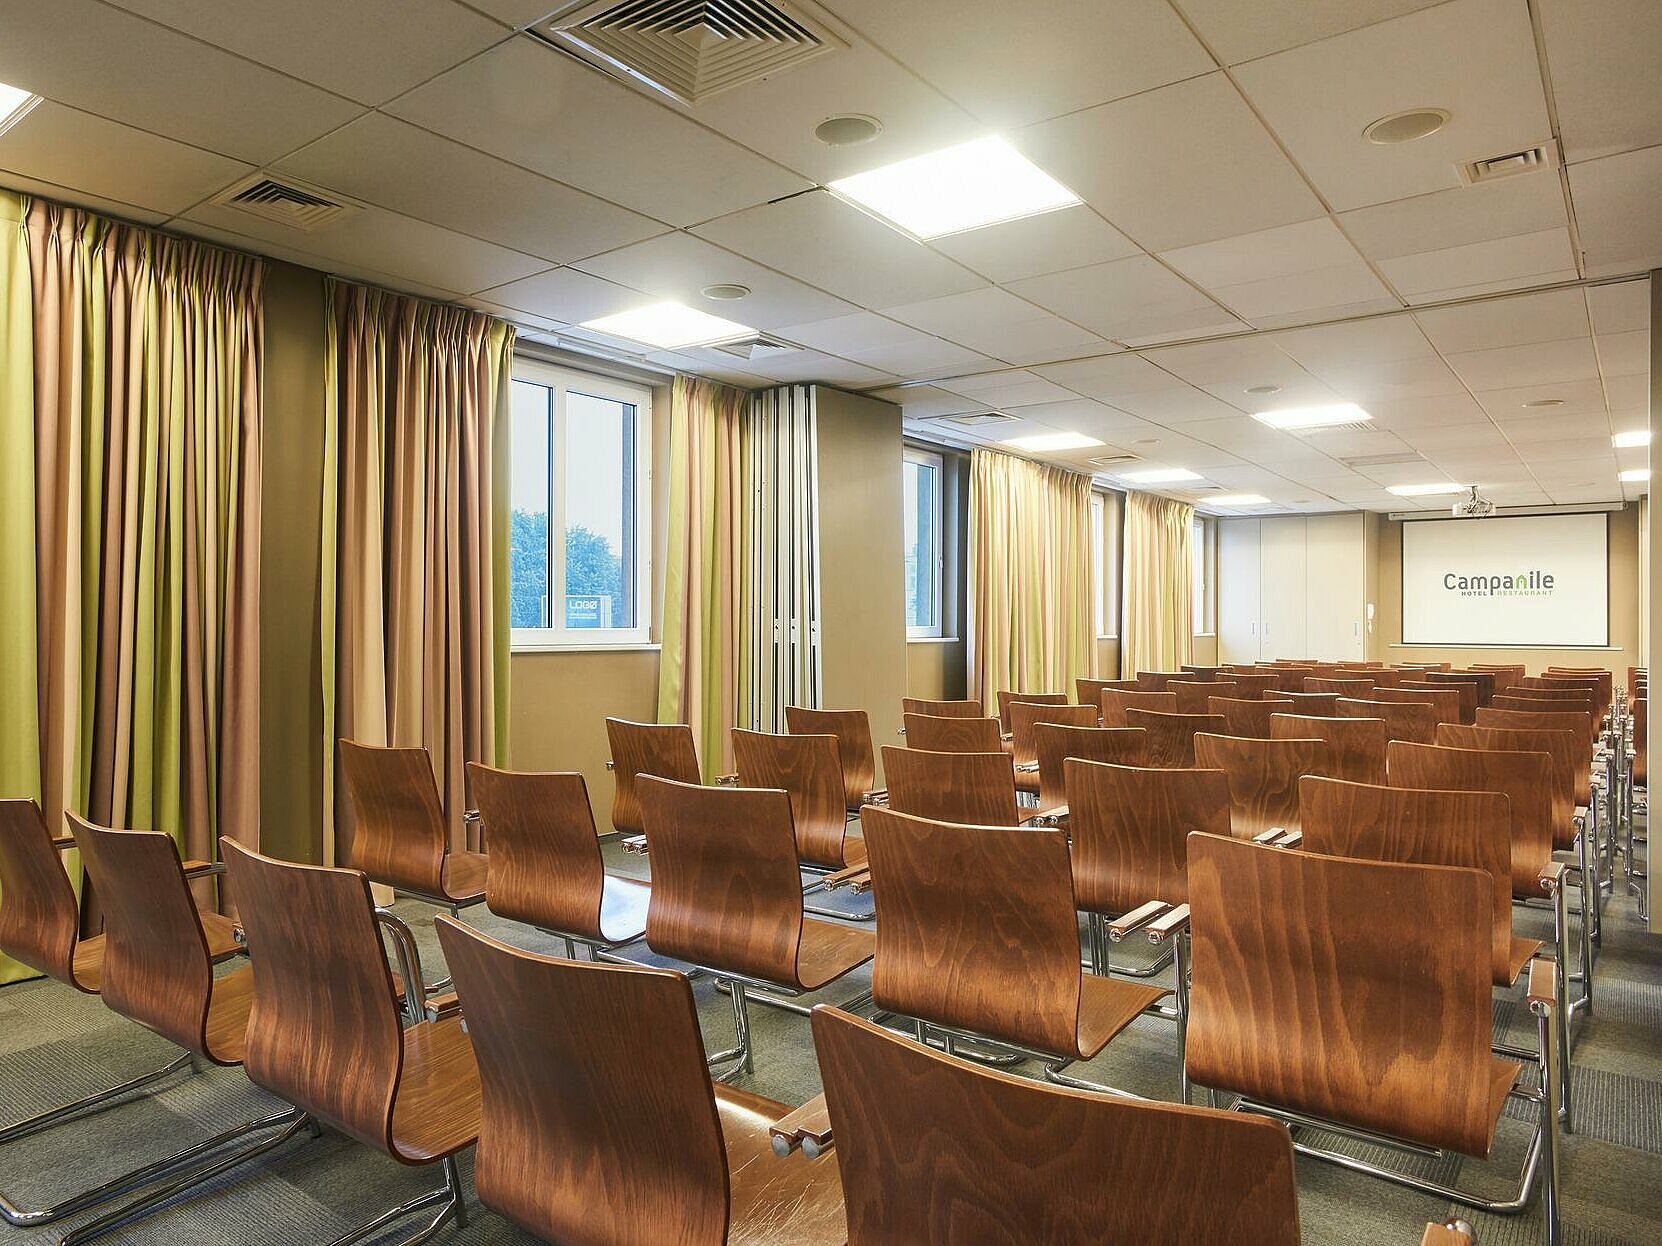 Campanile Hotel conference space 